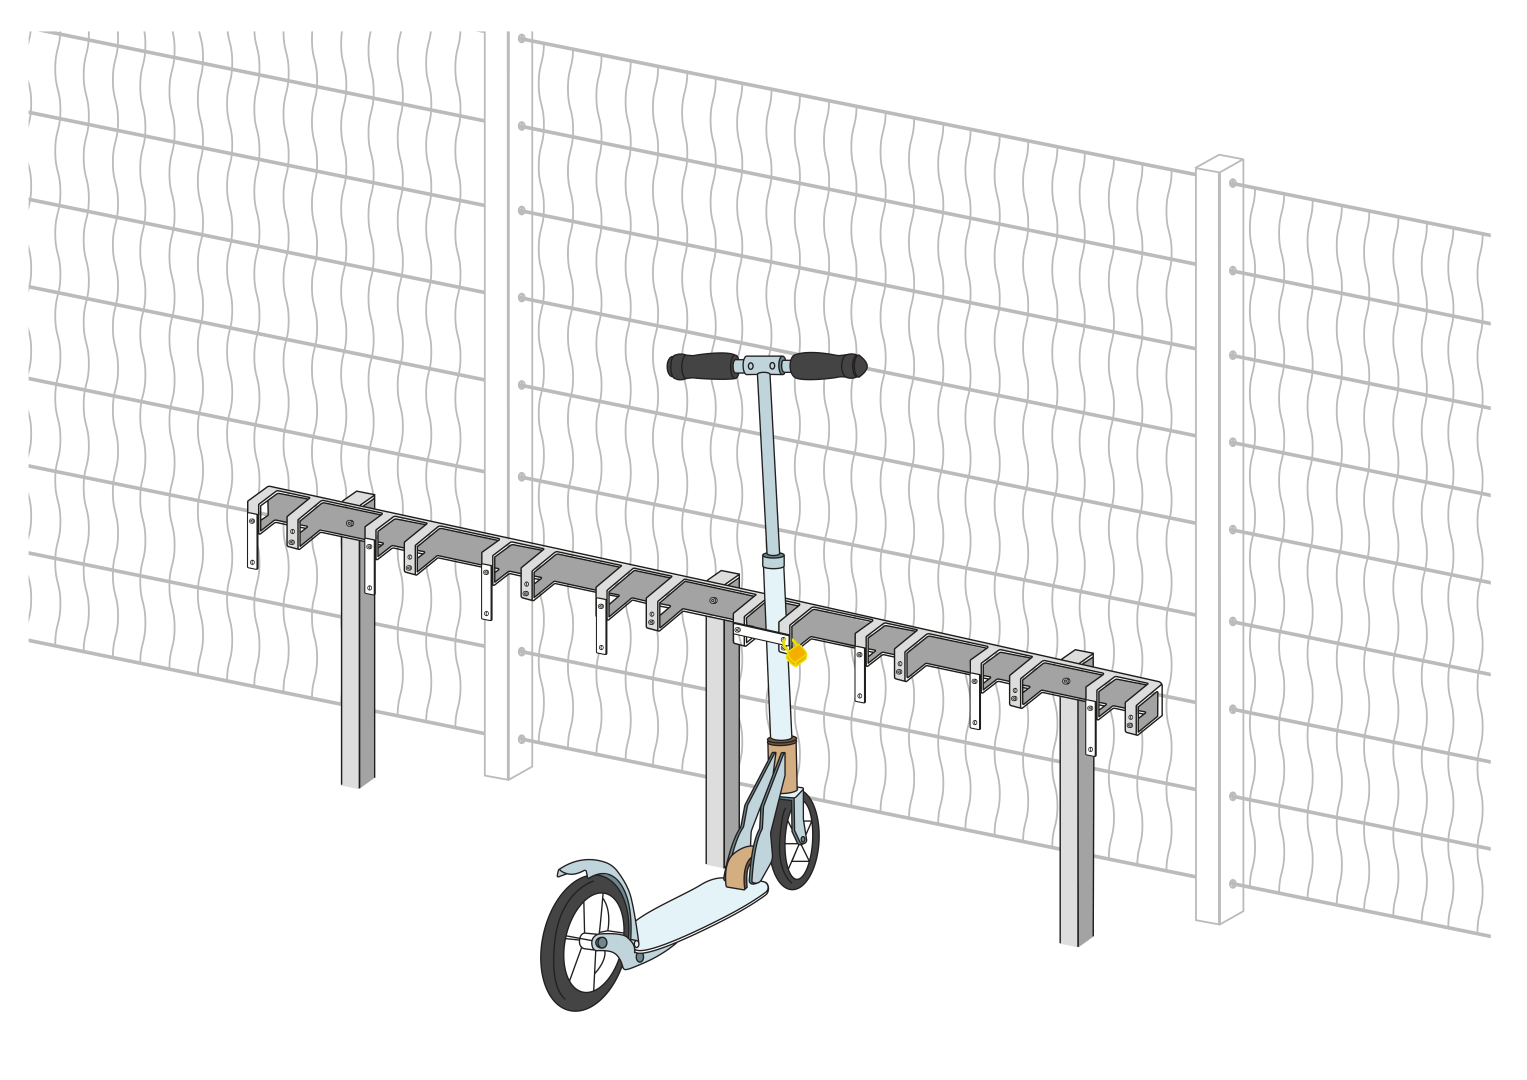 Scooter stand with 8 lockable spaces for scooters